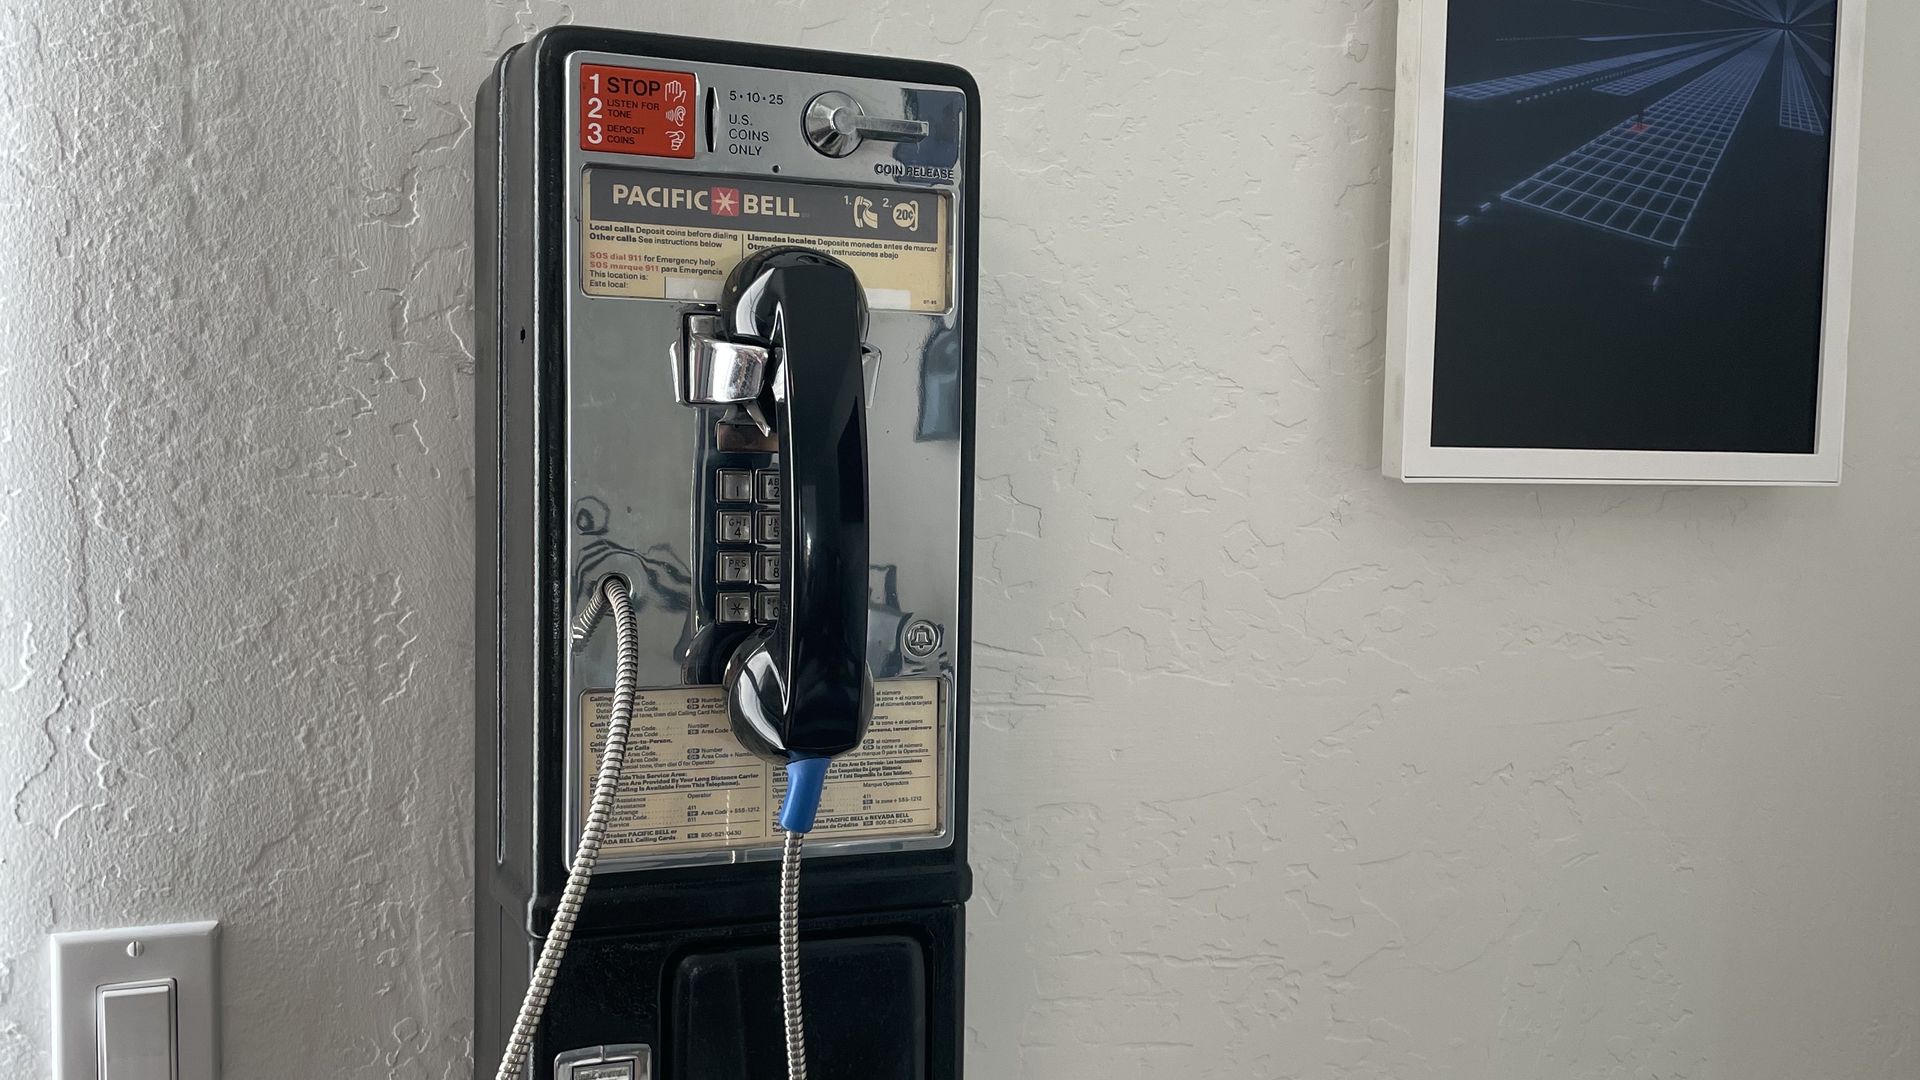 A pay phone in a home.